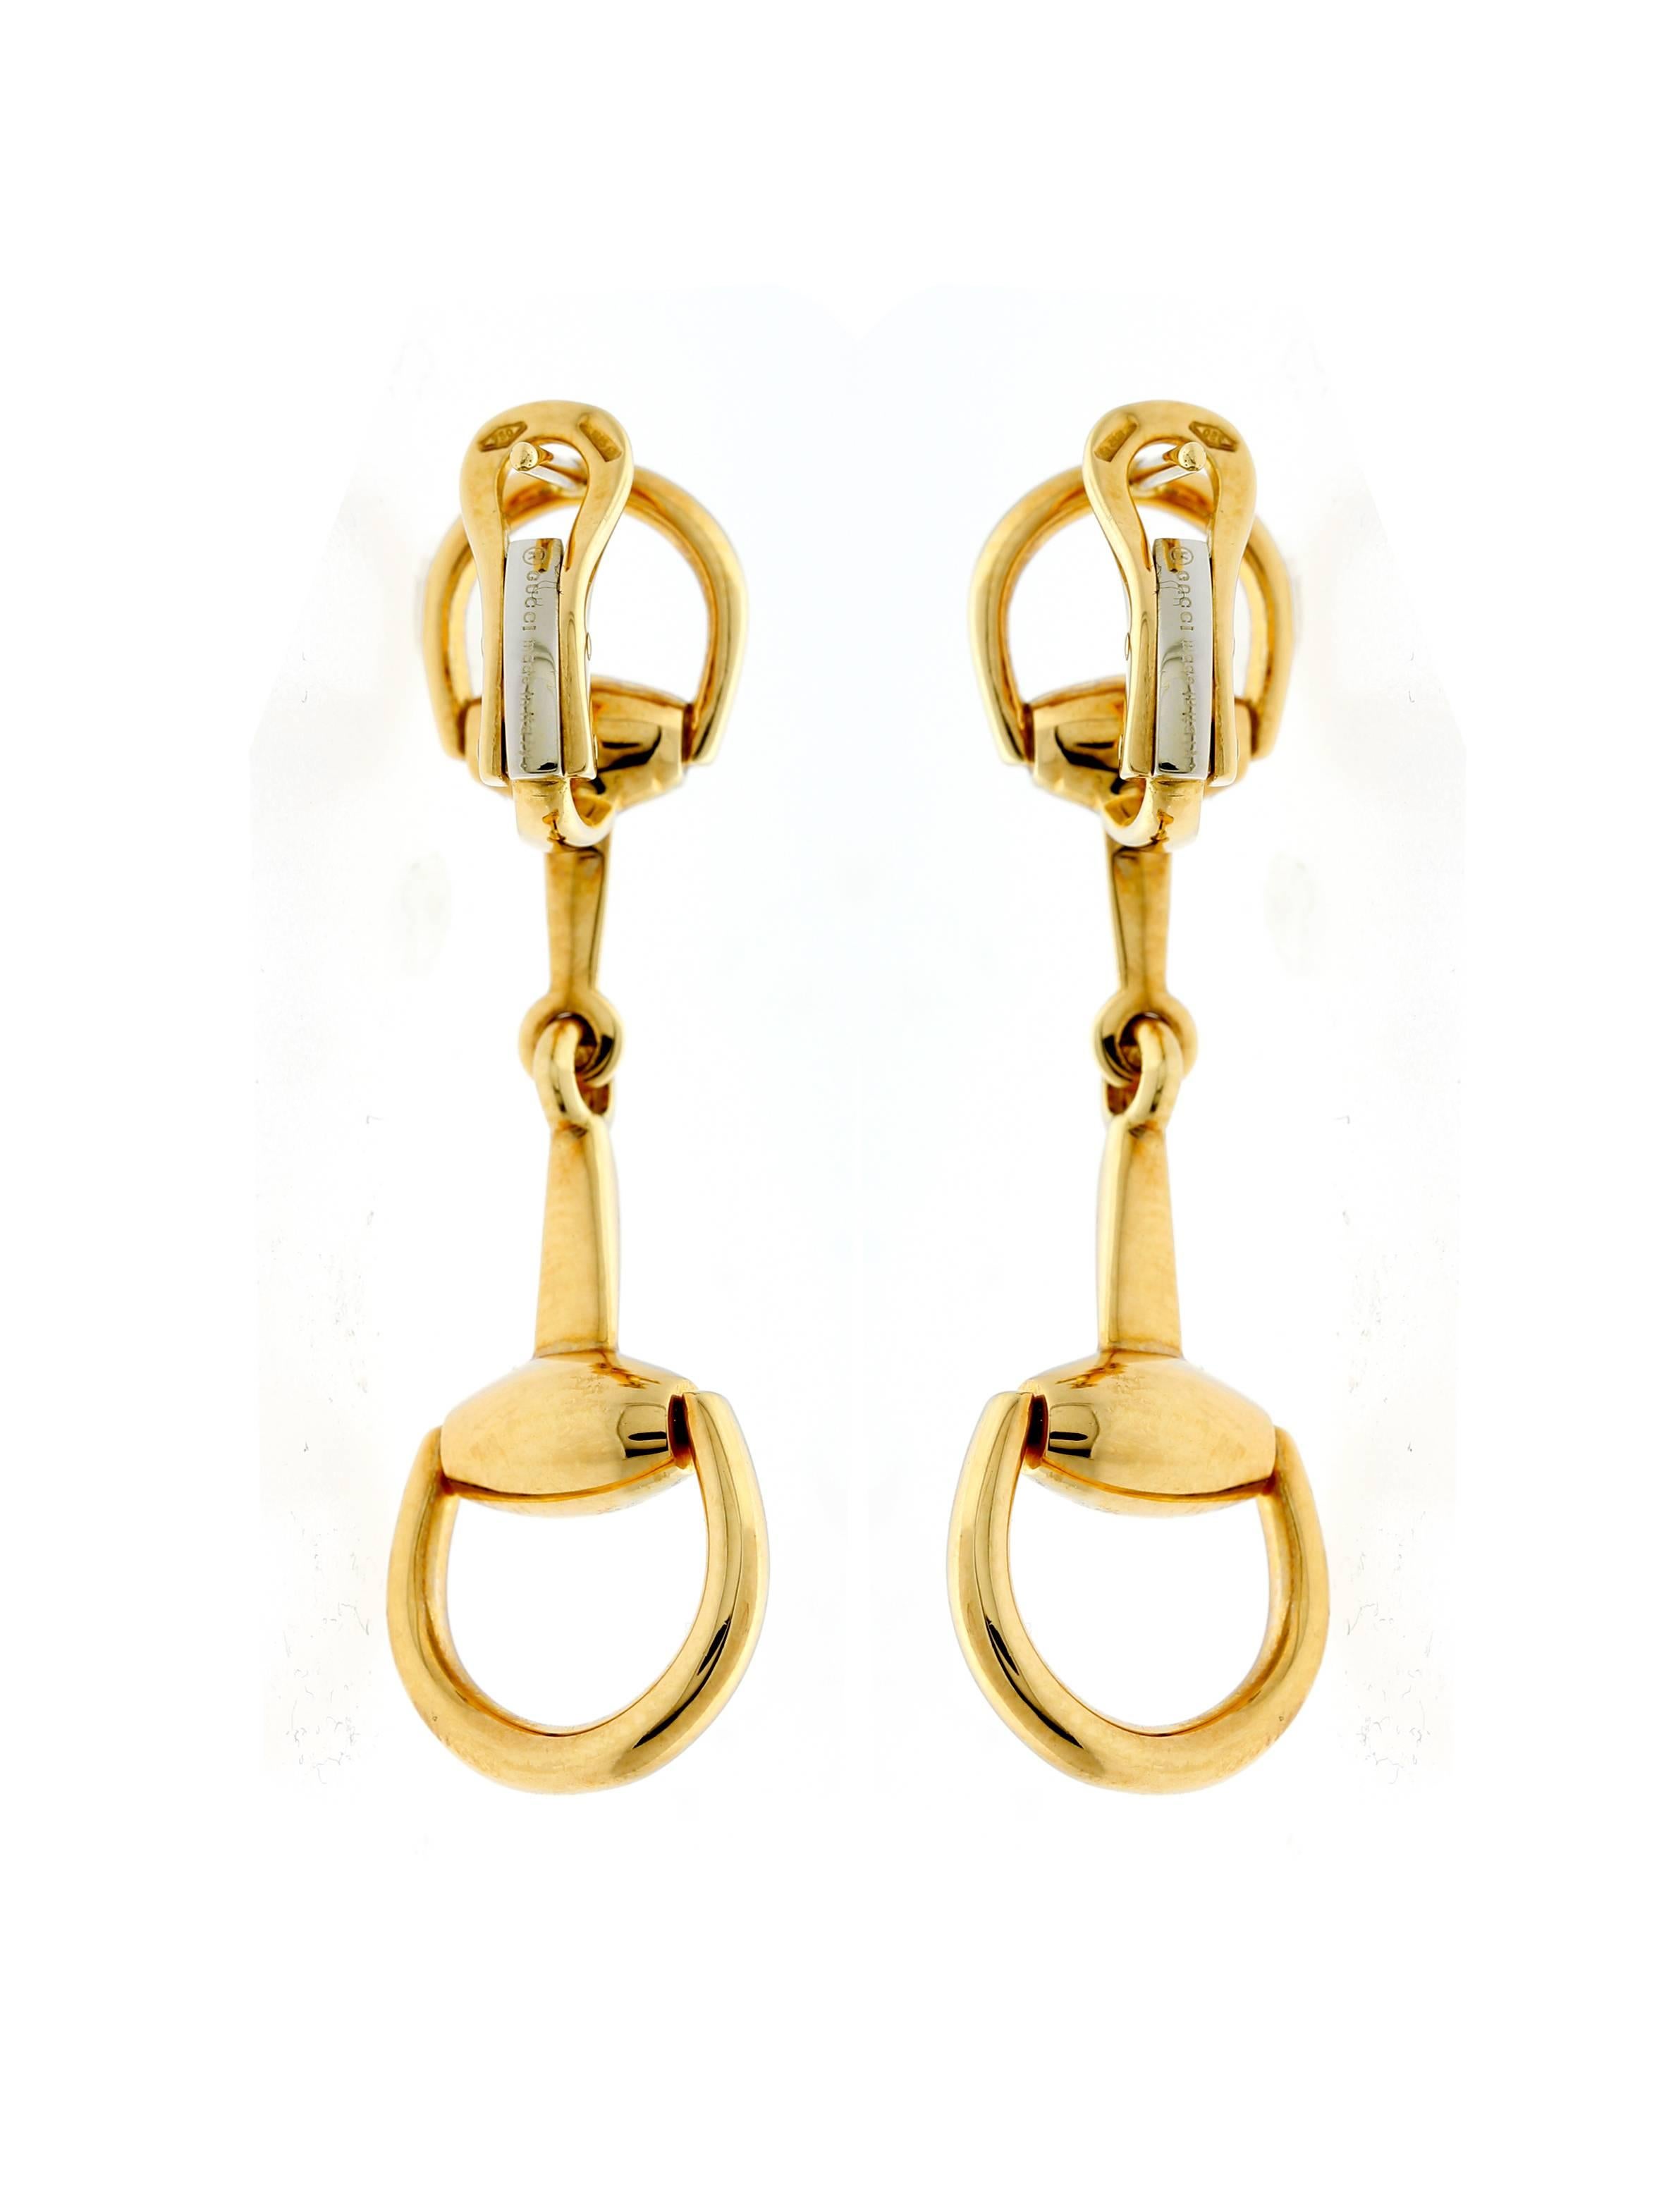 A stunning pair of warm Gucci 18k yellow gold 